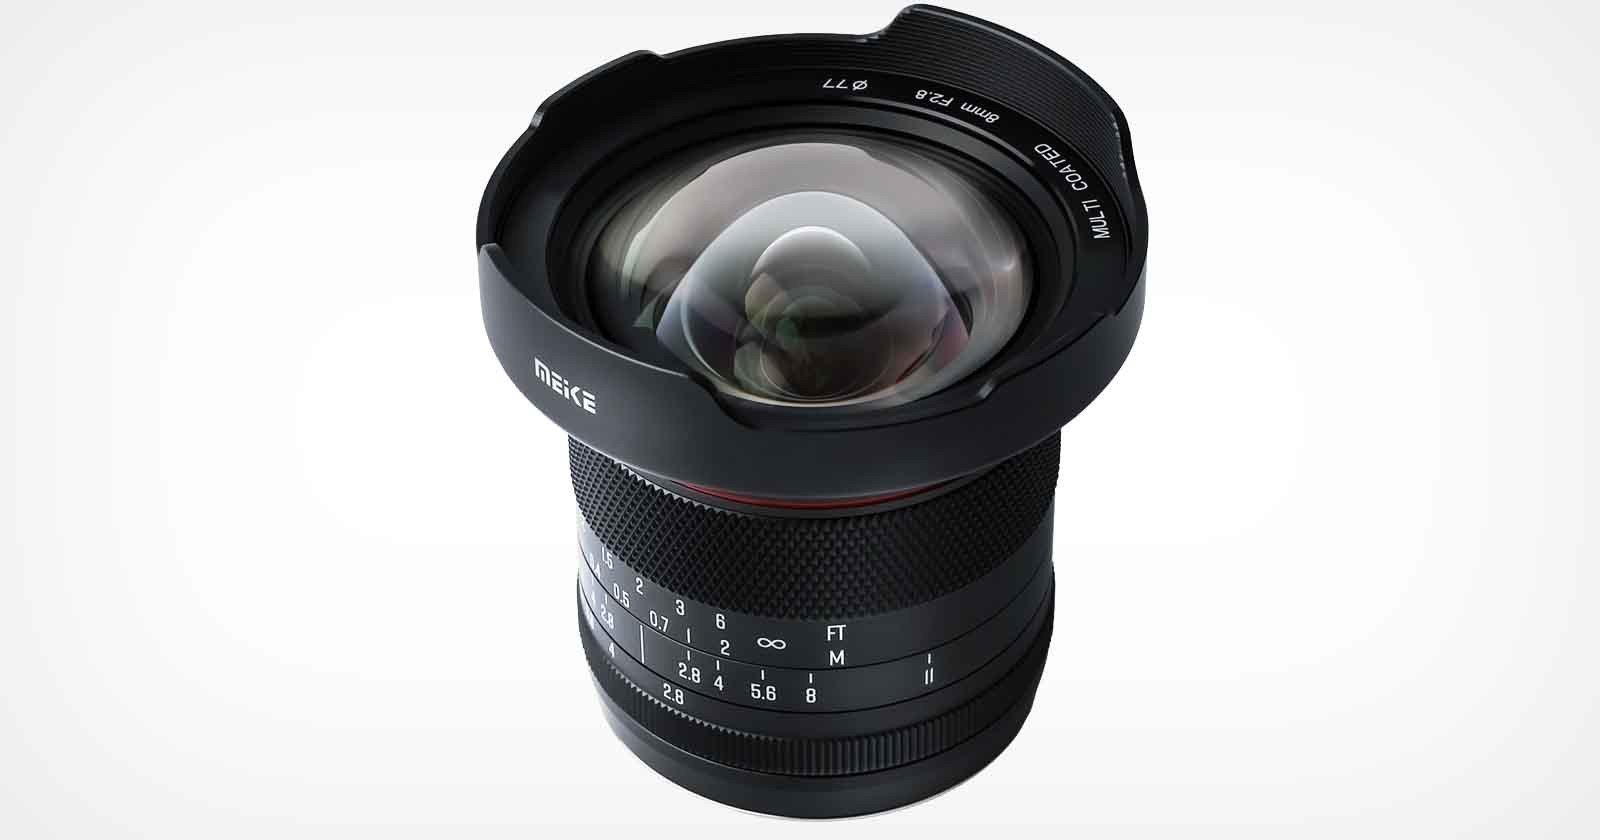 Meike Launches a New $400 8mm f/2.8 for MFT Cameras